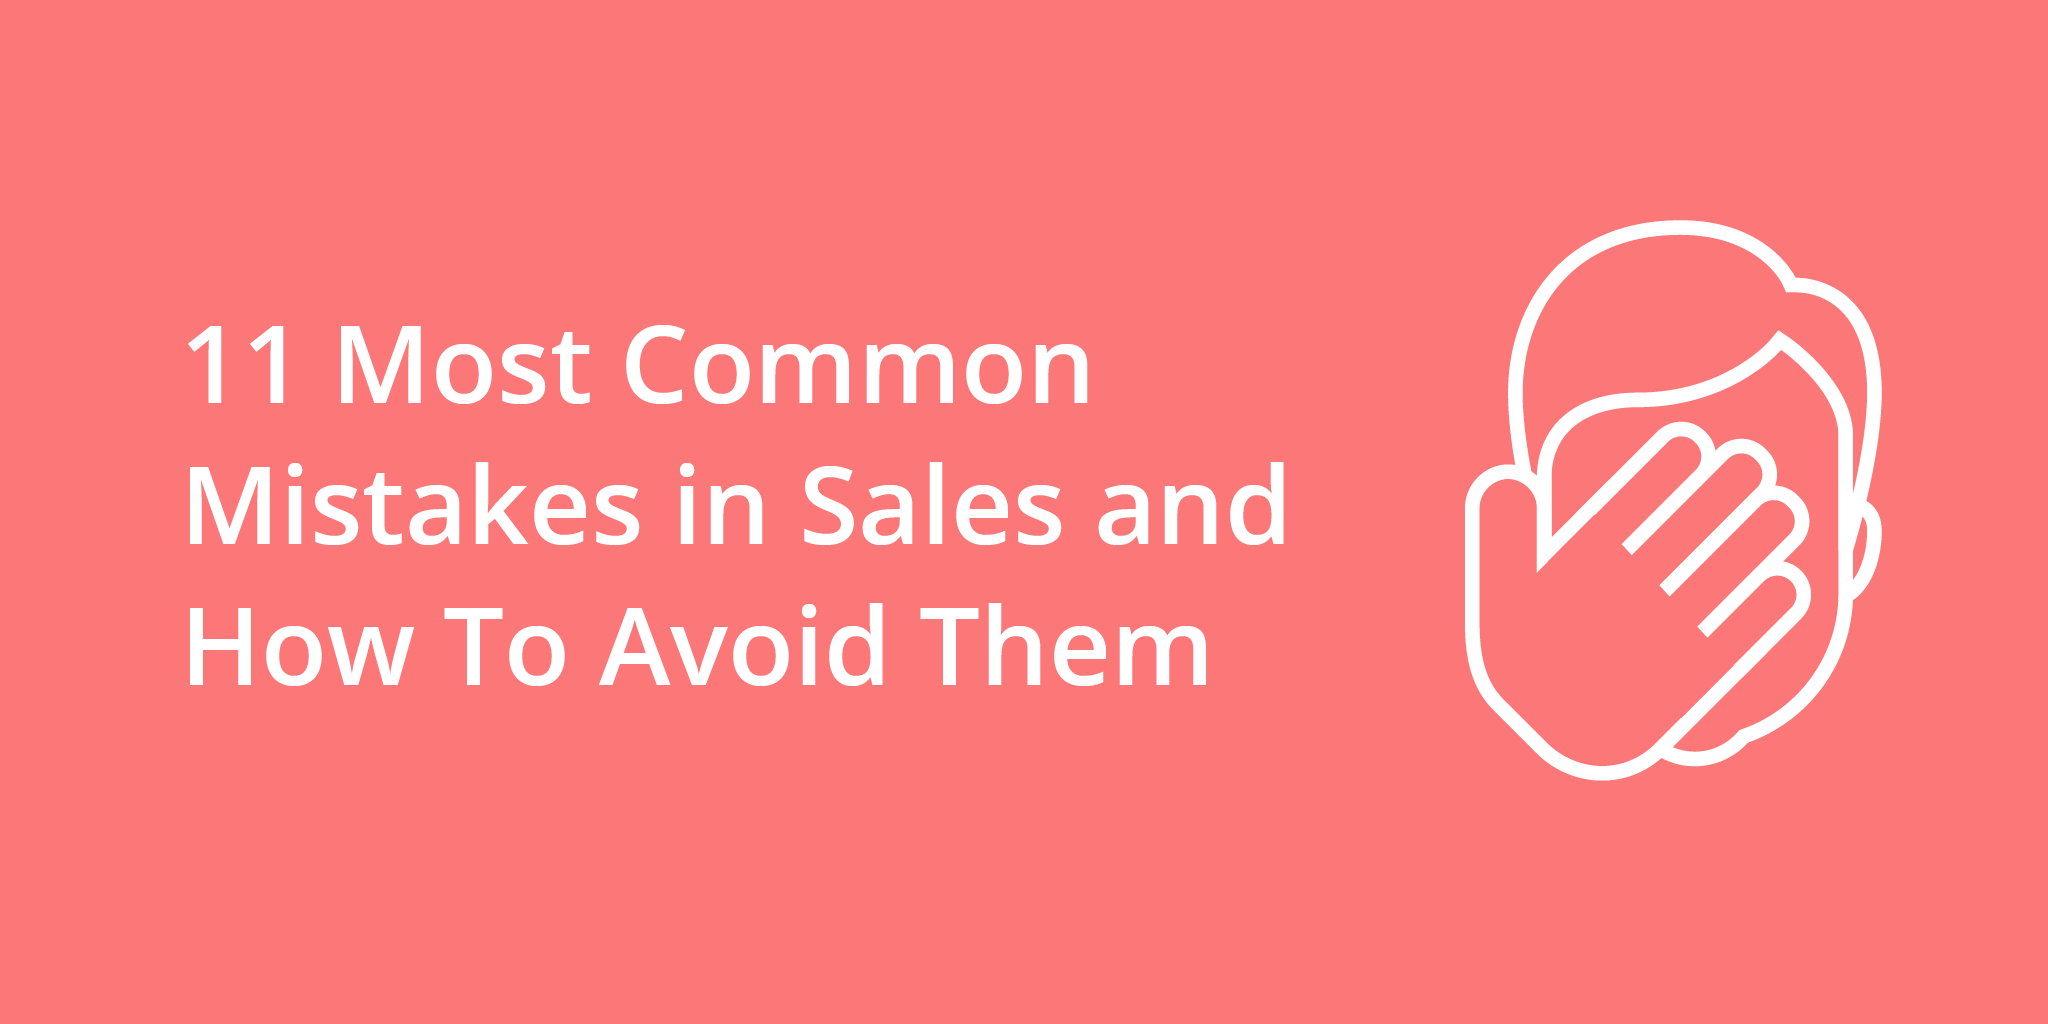 https://www.kixie.com/assets/img/uploads/articles/tips-for-new-salespeople-to-learn-and-avoid-mistakes.png